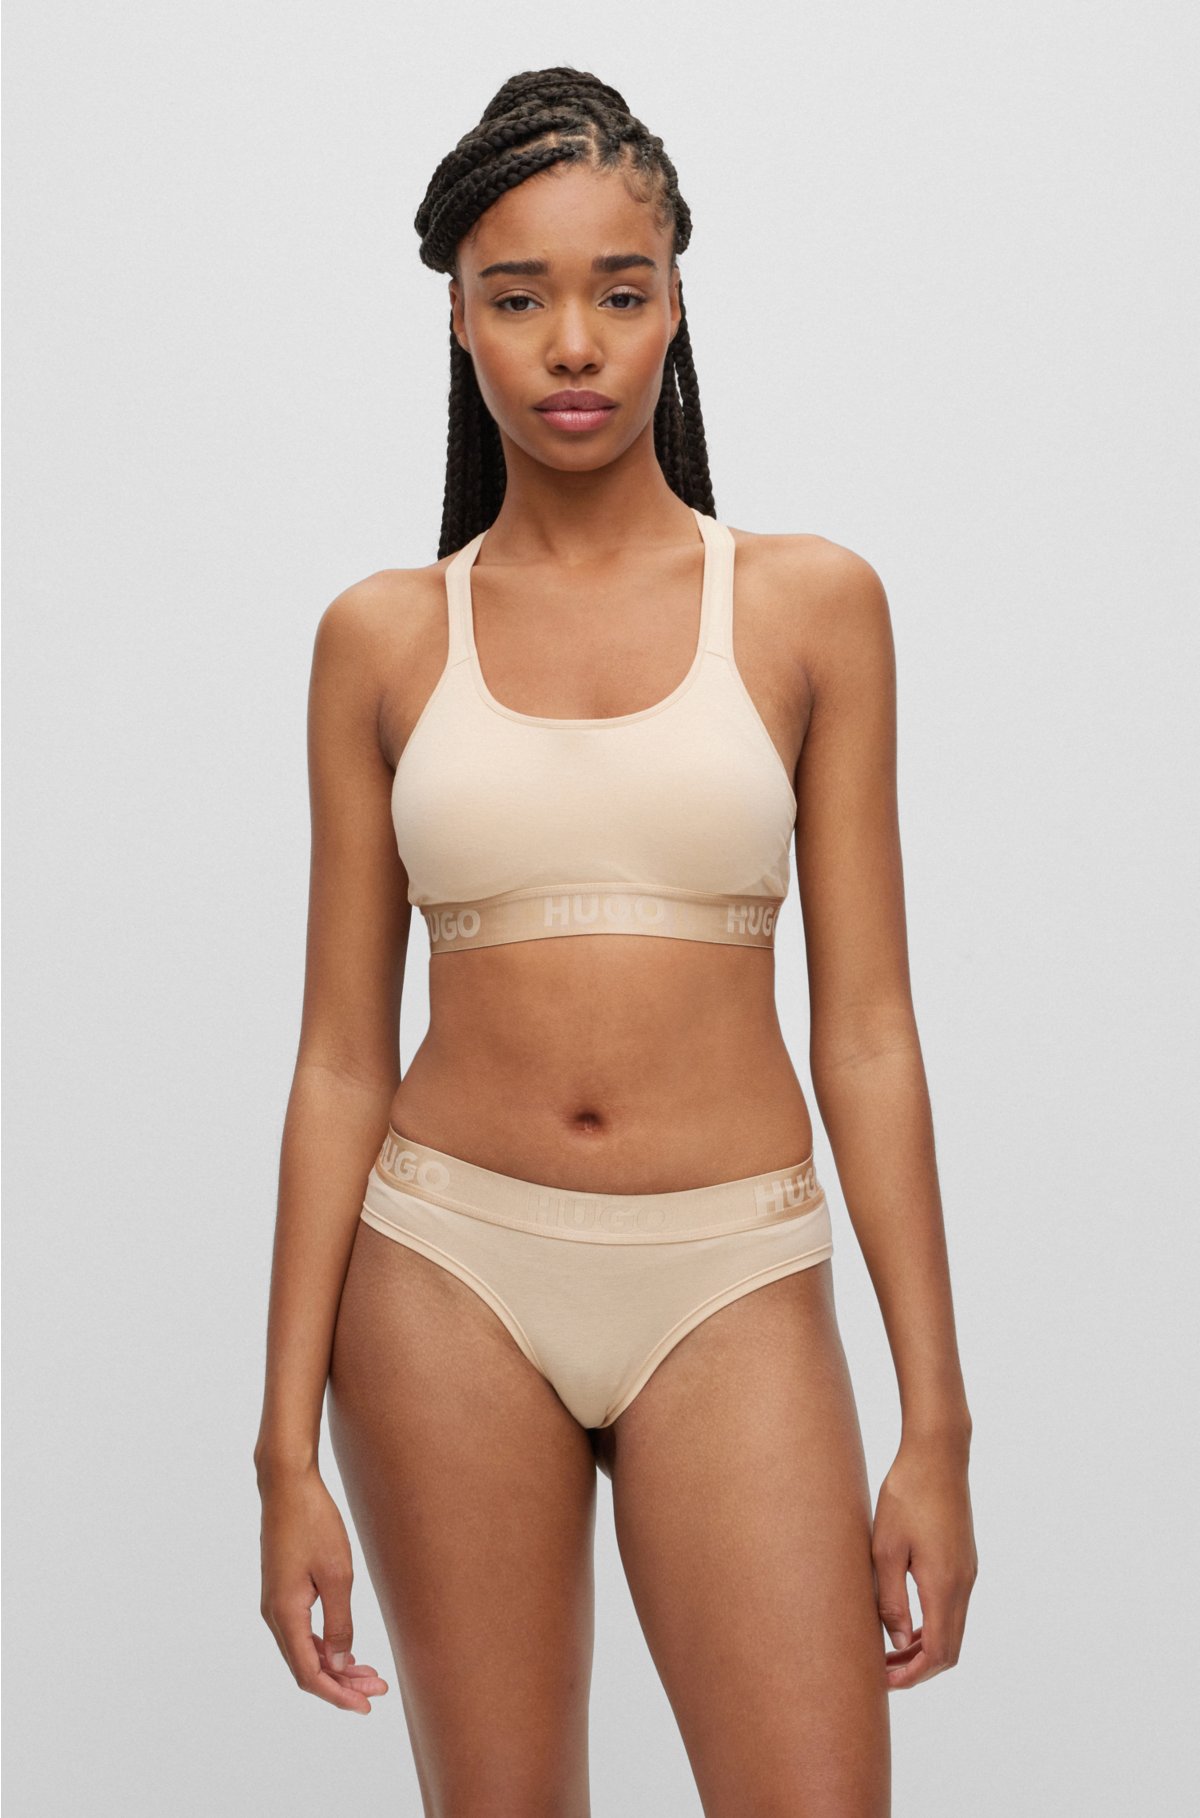 repeat in with cotton Bralette - logos stretch HUGO